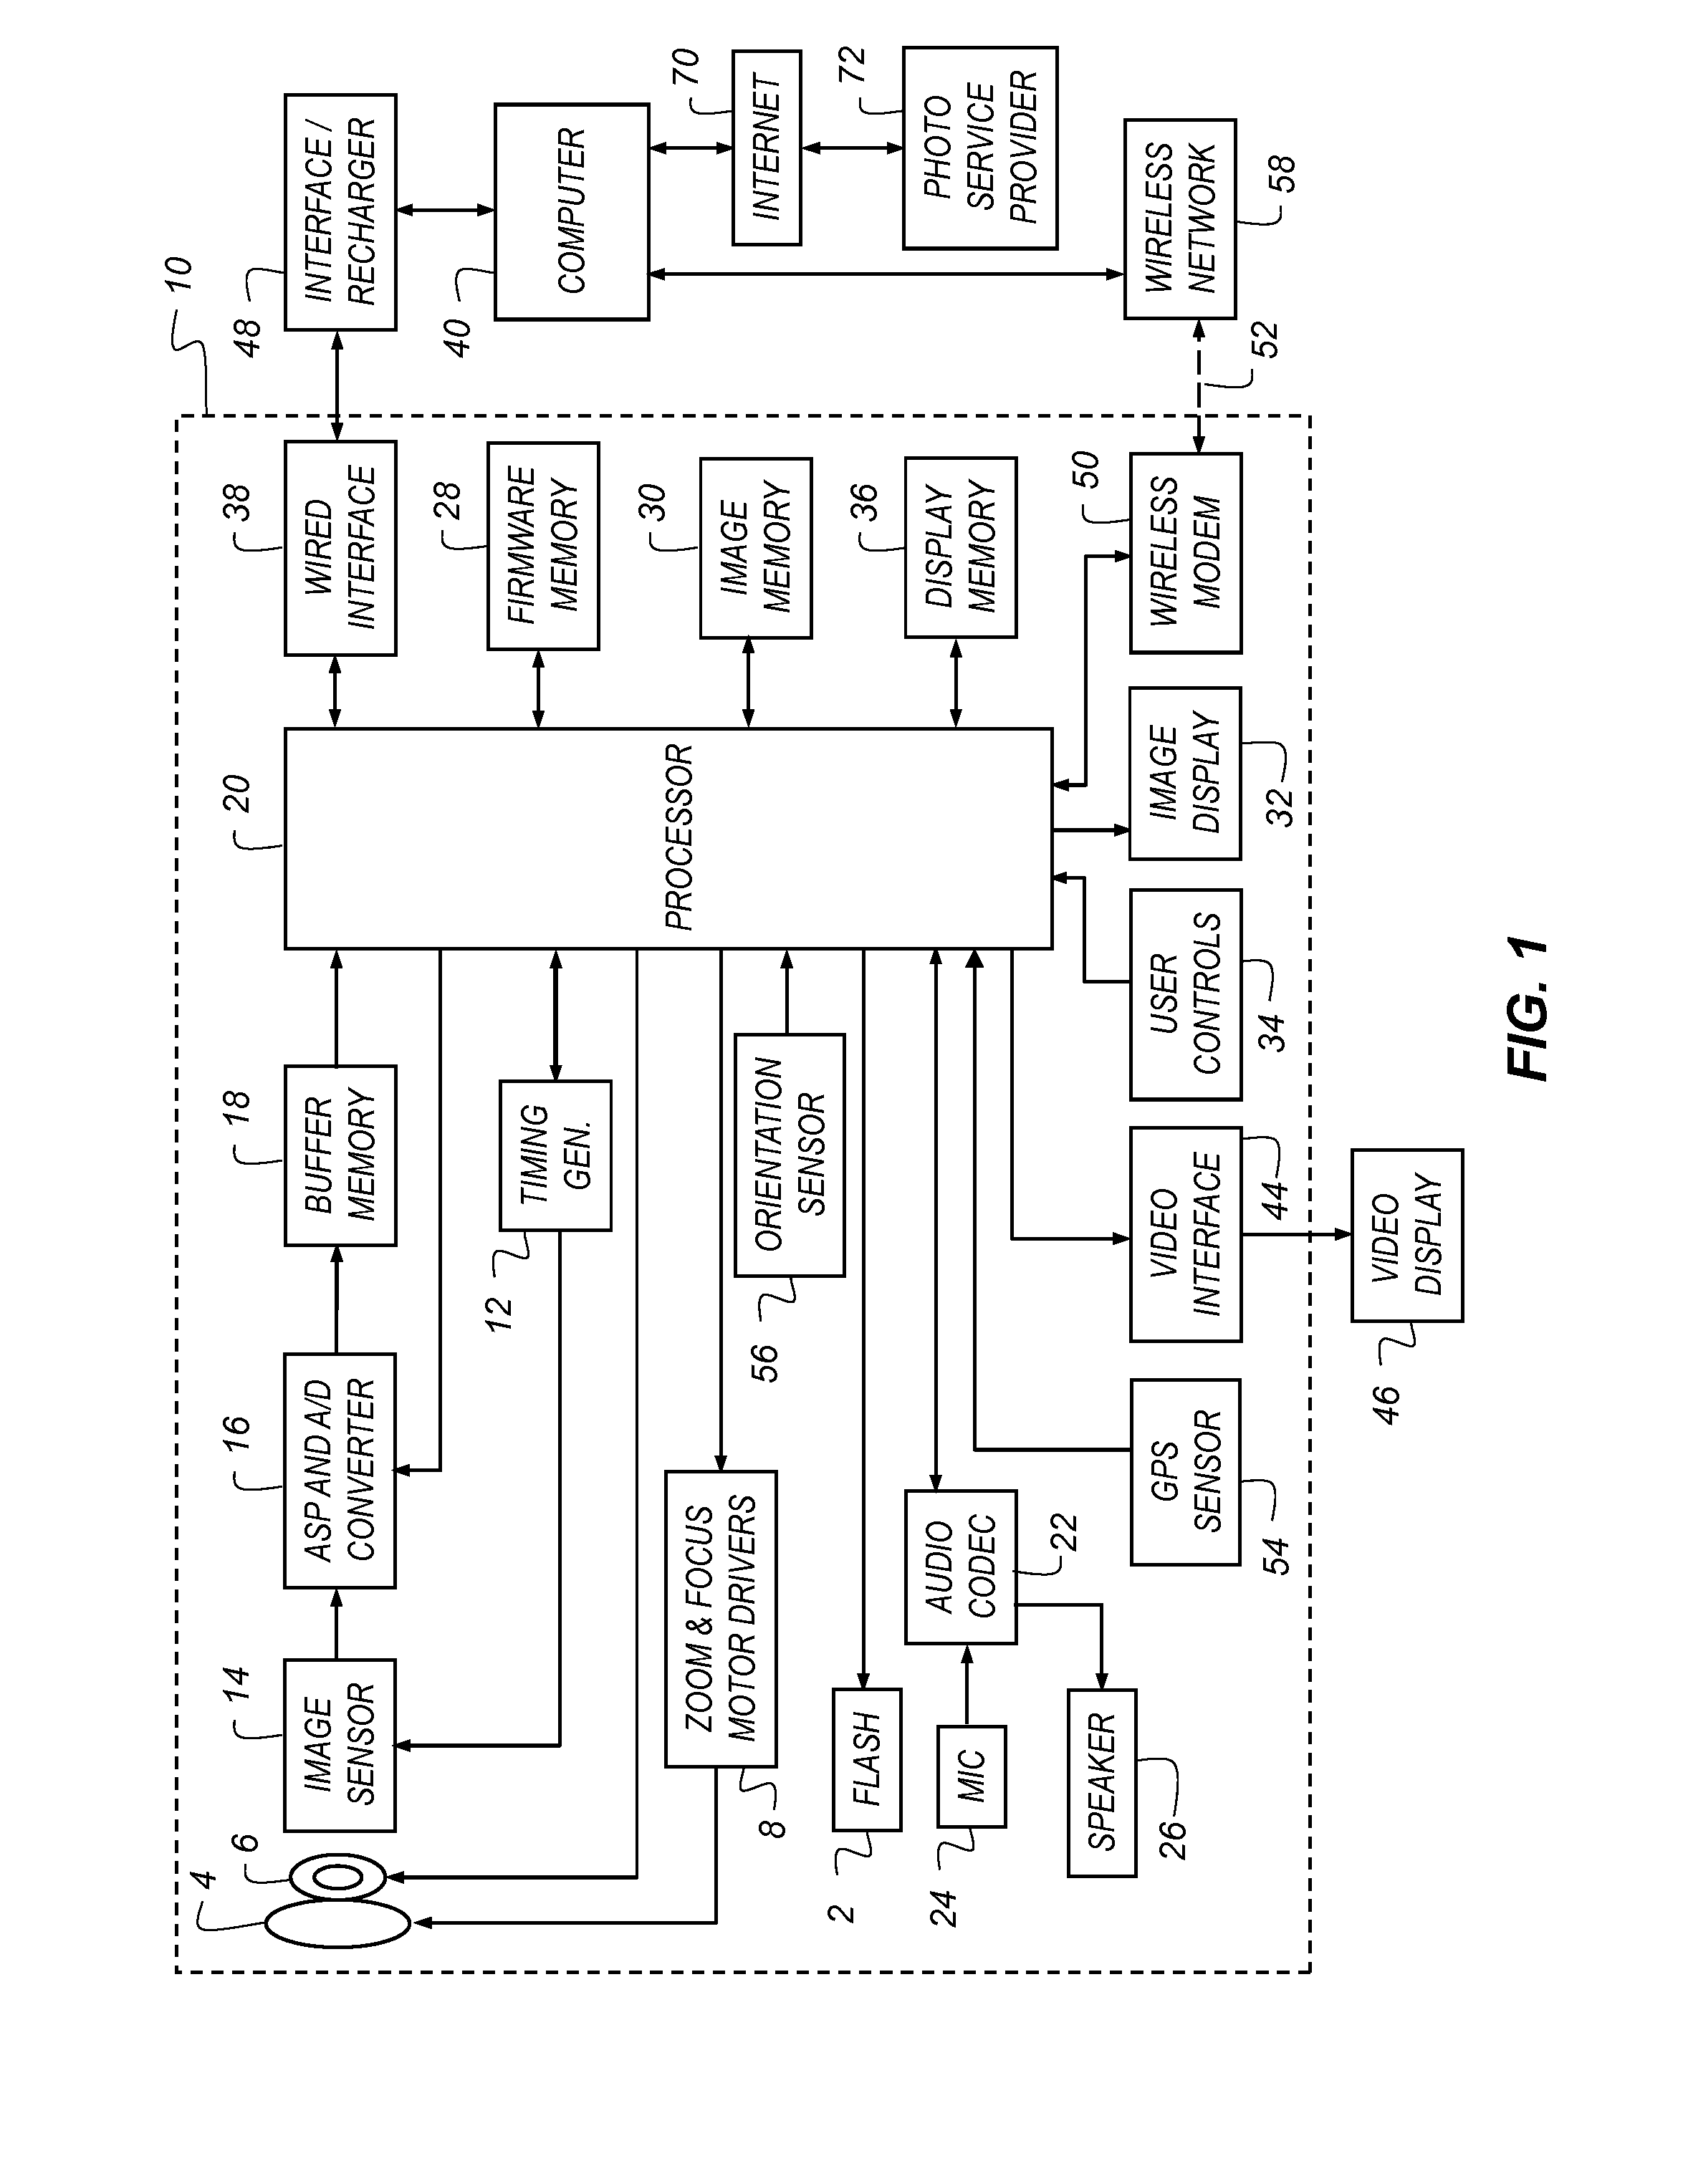 Camera having processing customized for recognized persons